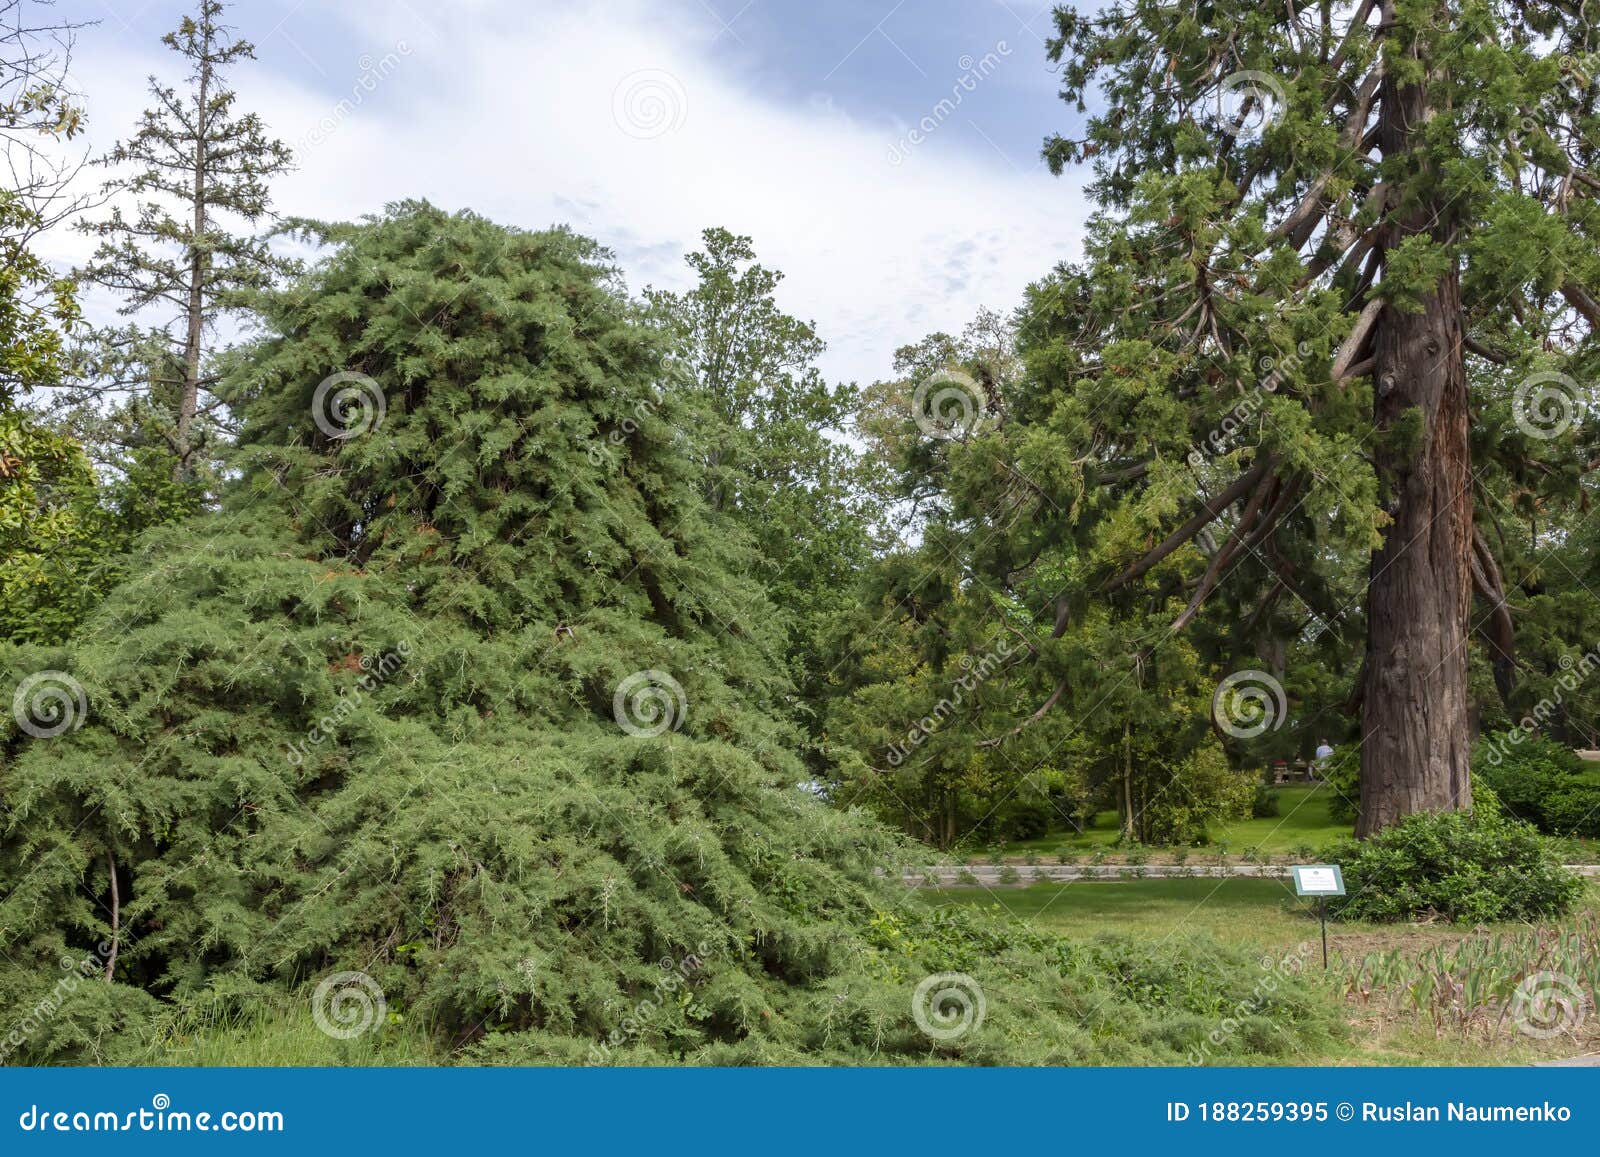 cypress and sequoiadendron in the park